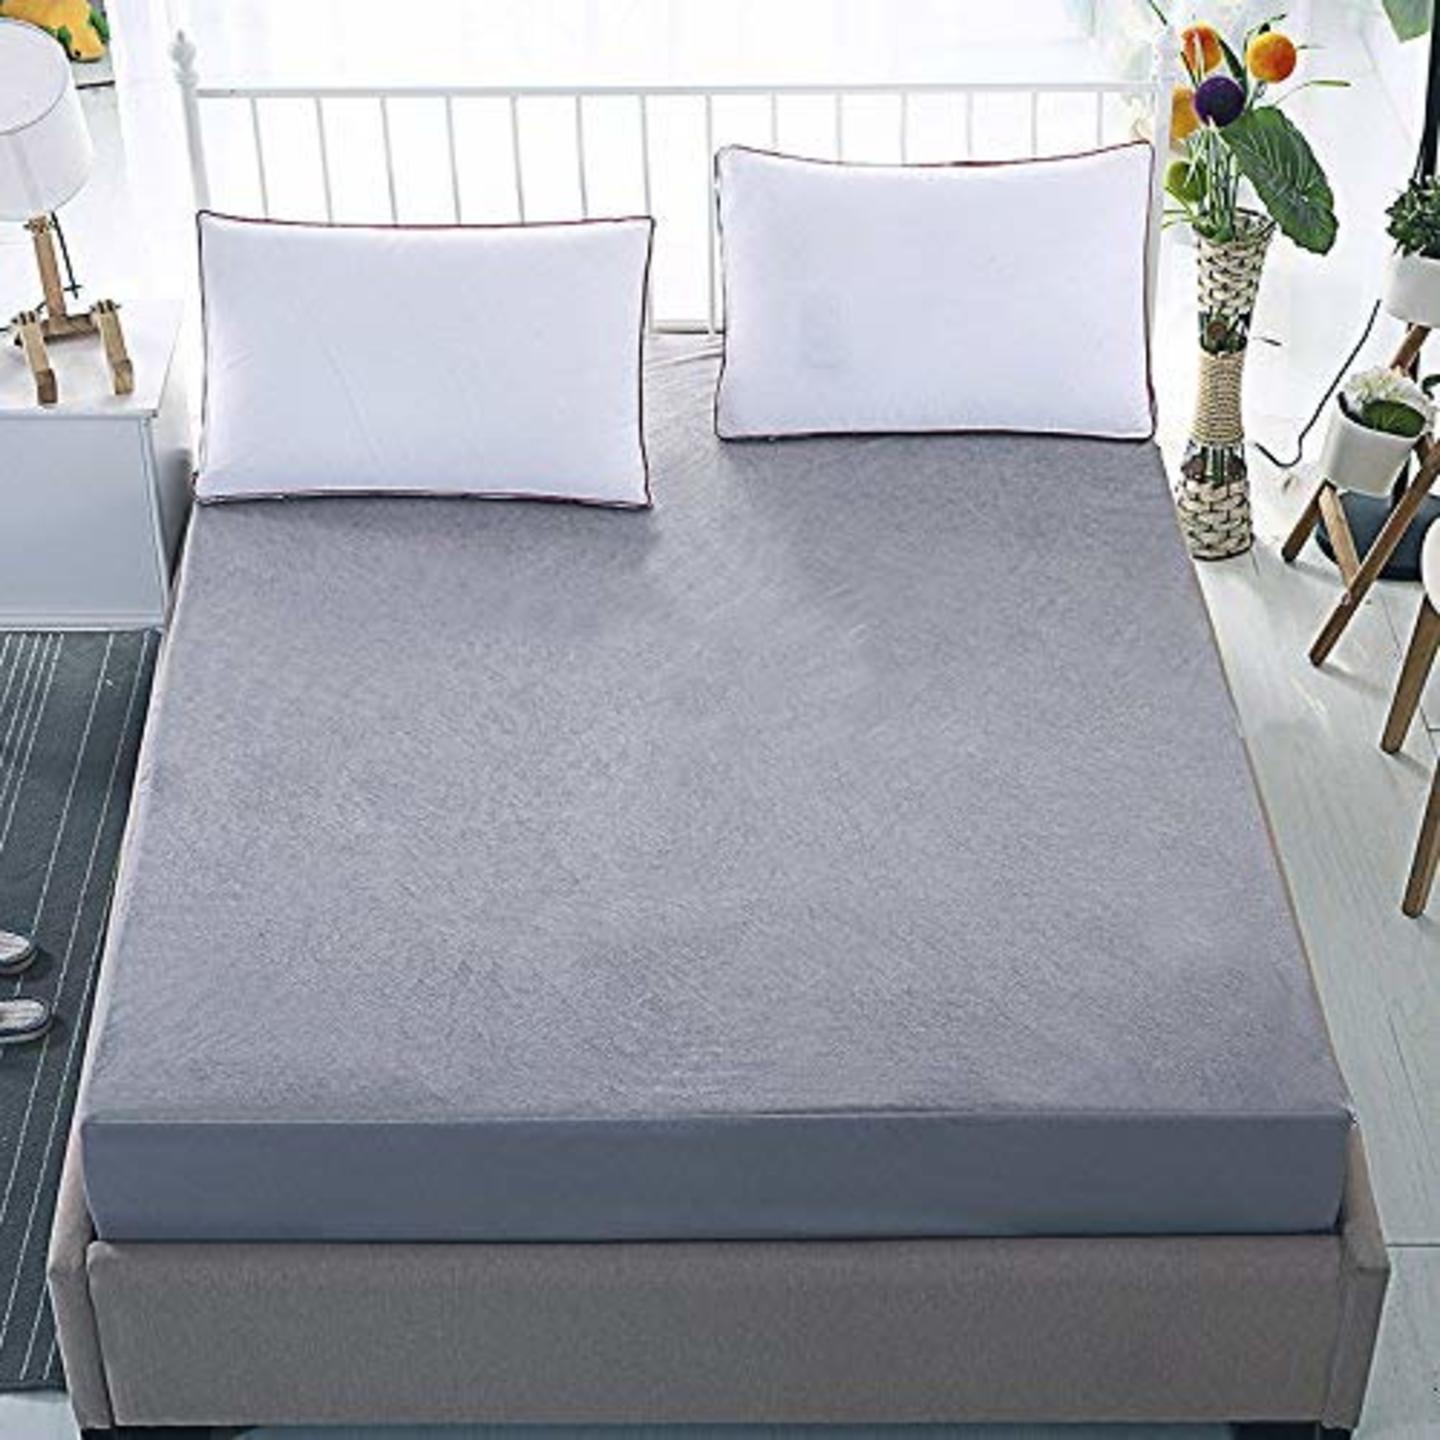 Cotton Terry Waterproof Mattress Protector FITTED